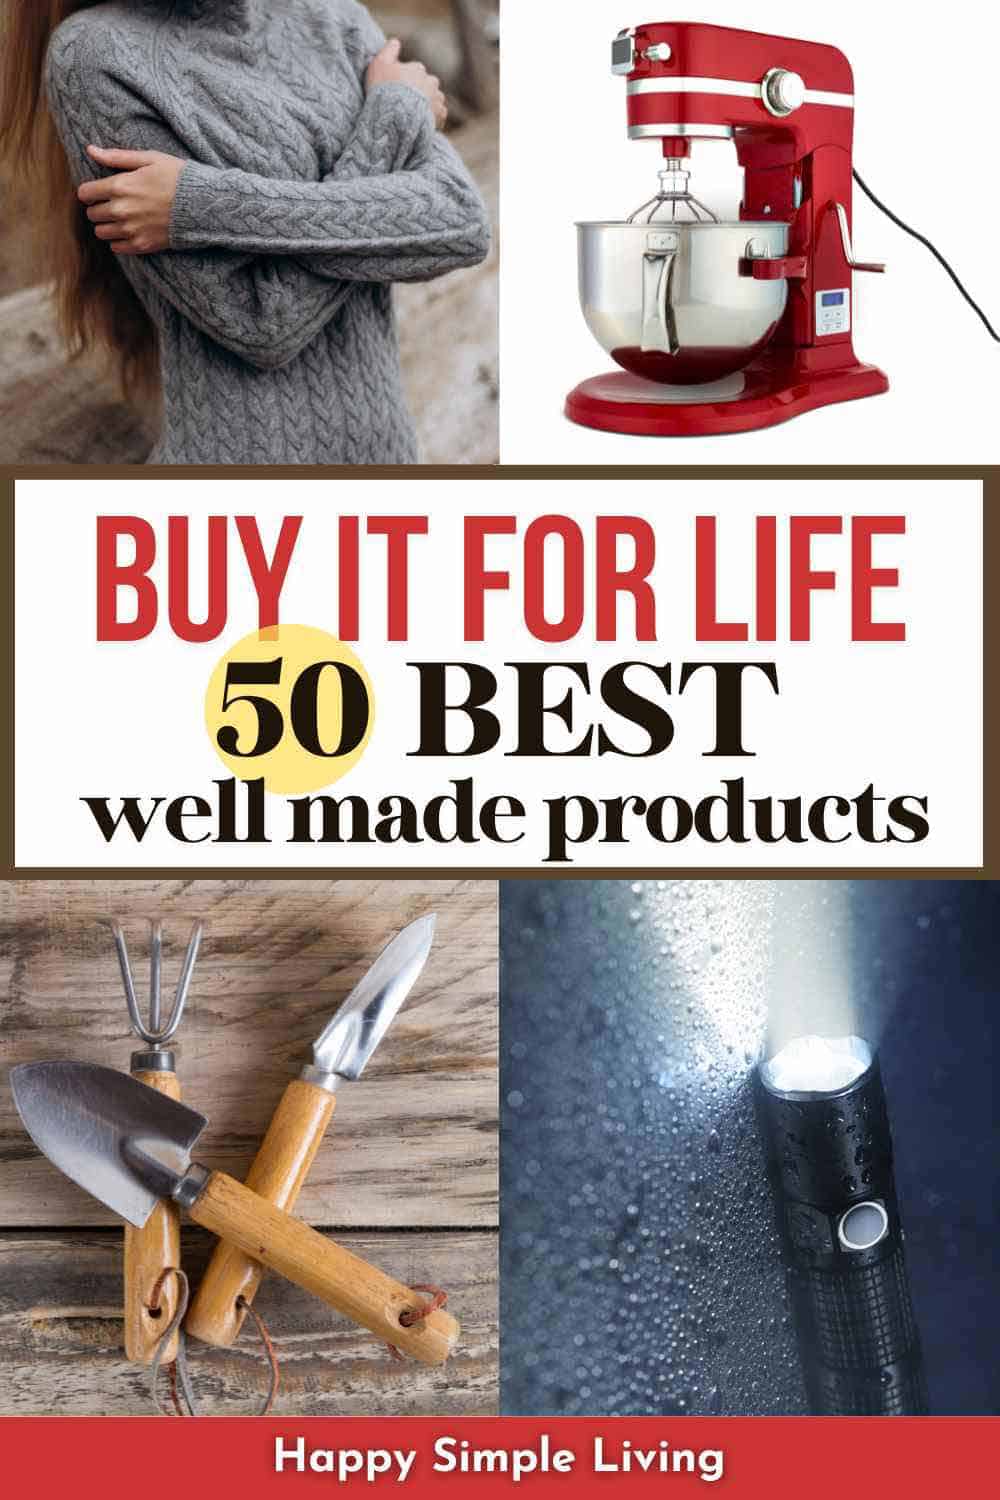 A woman in a cashmere sweater, a KitchenAid stand mixer, a flashlight, and quality garden tools.